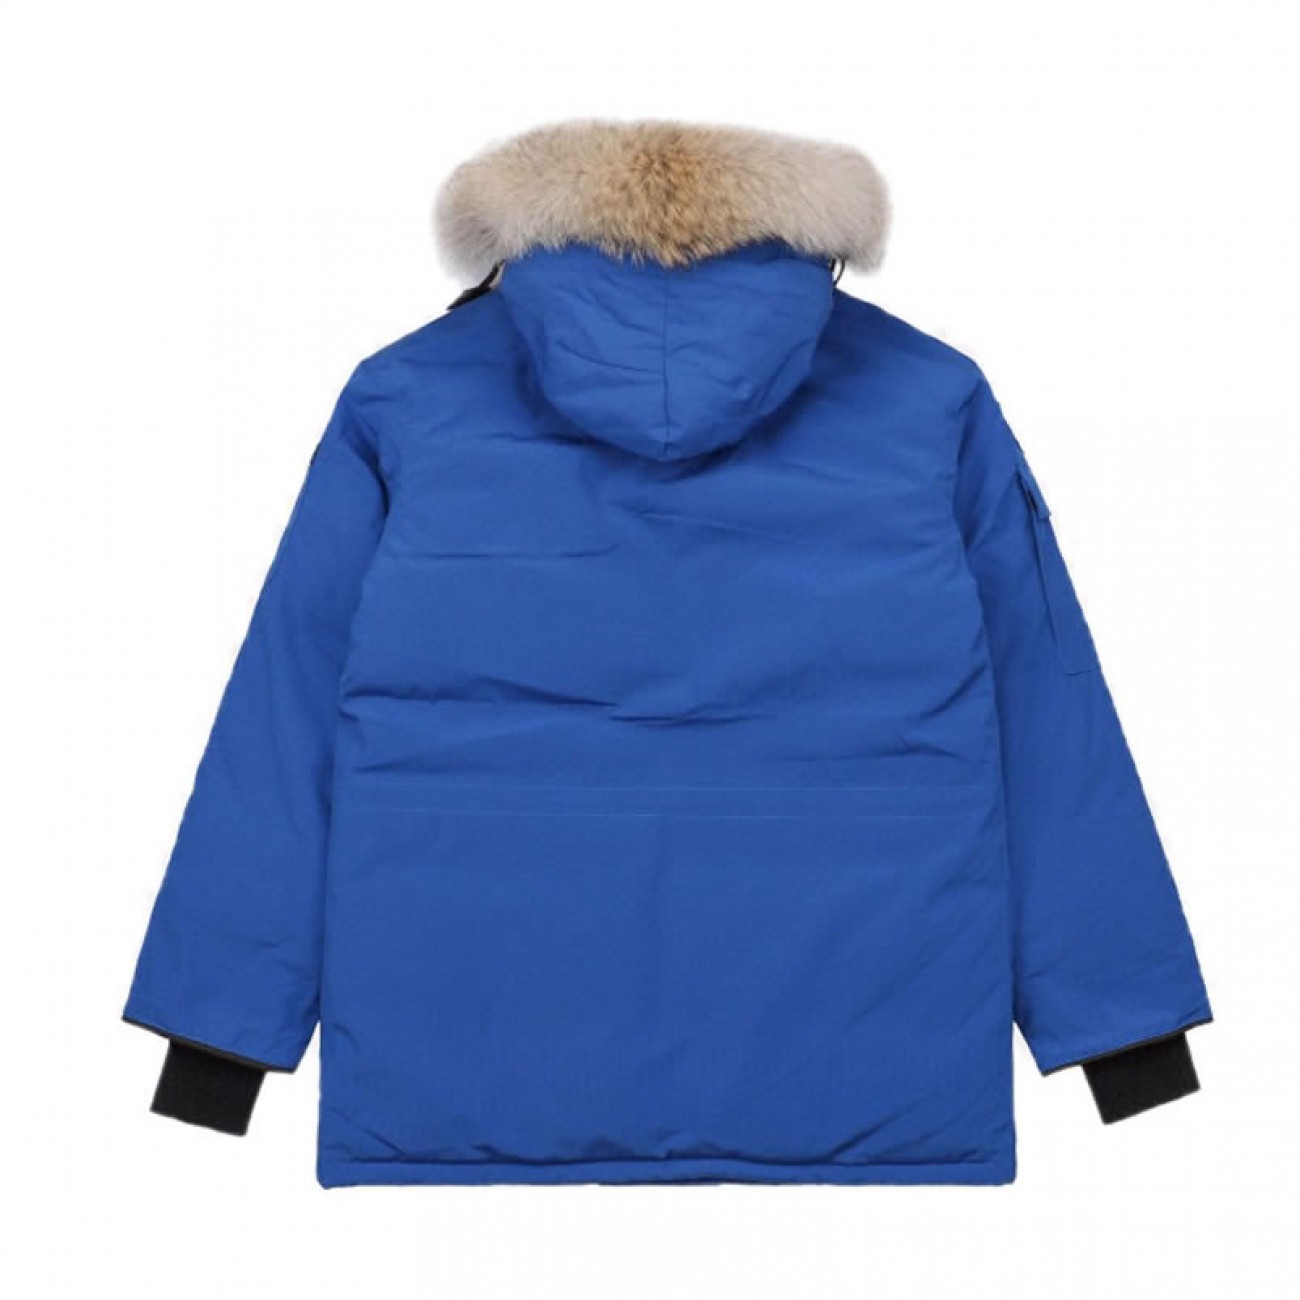 08 ' Canada Goose '19FW Expedition 4660MA Down Jacket Coat "Sky Blue"